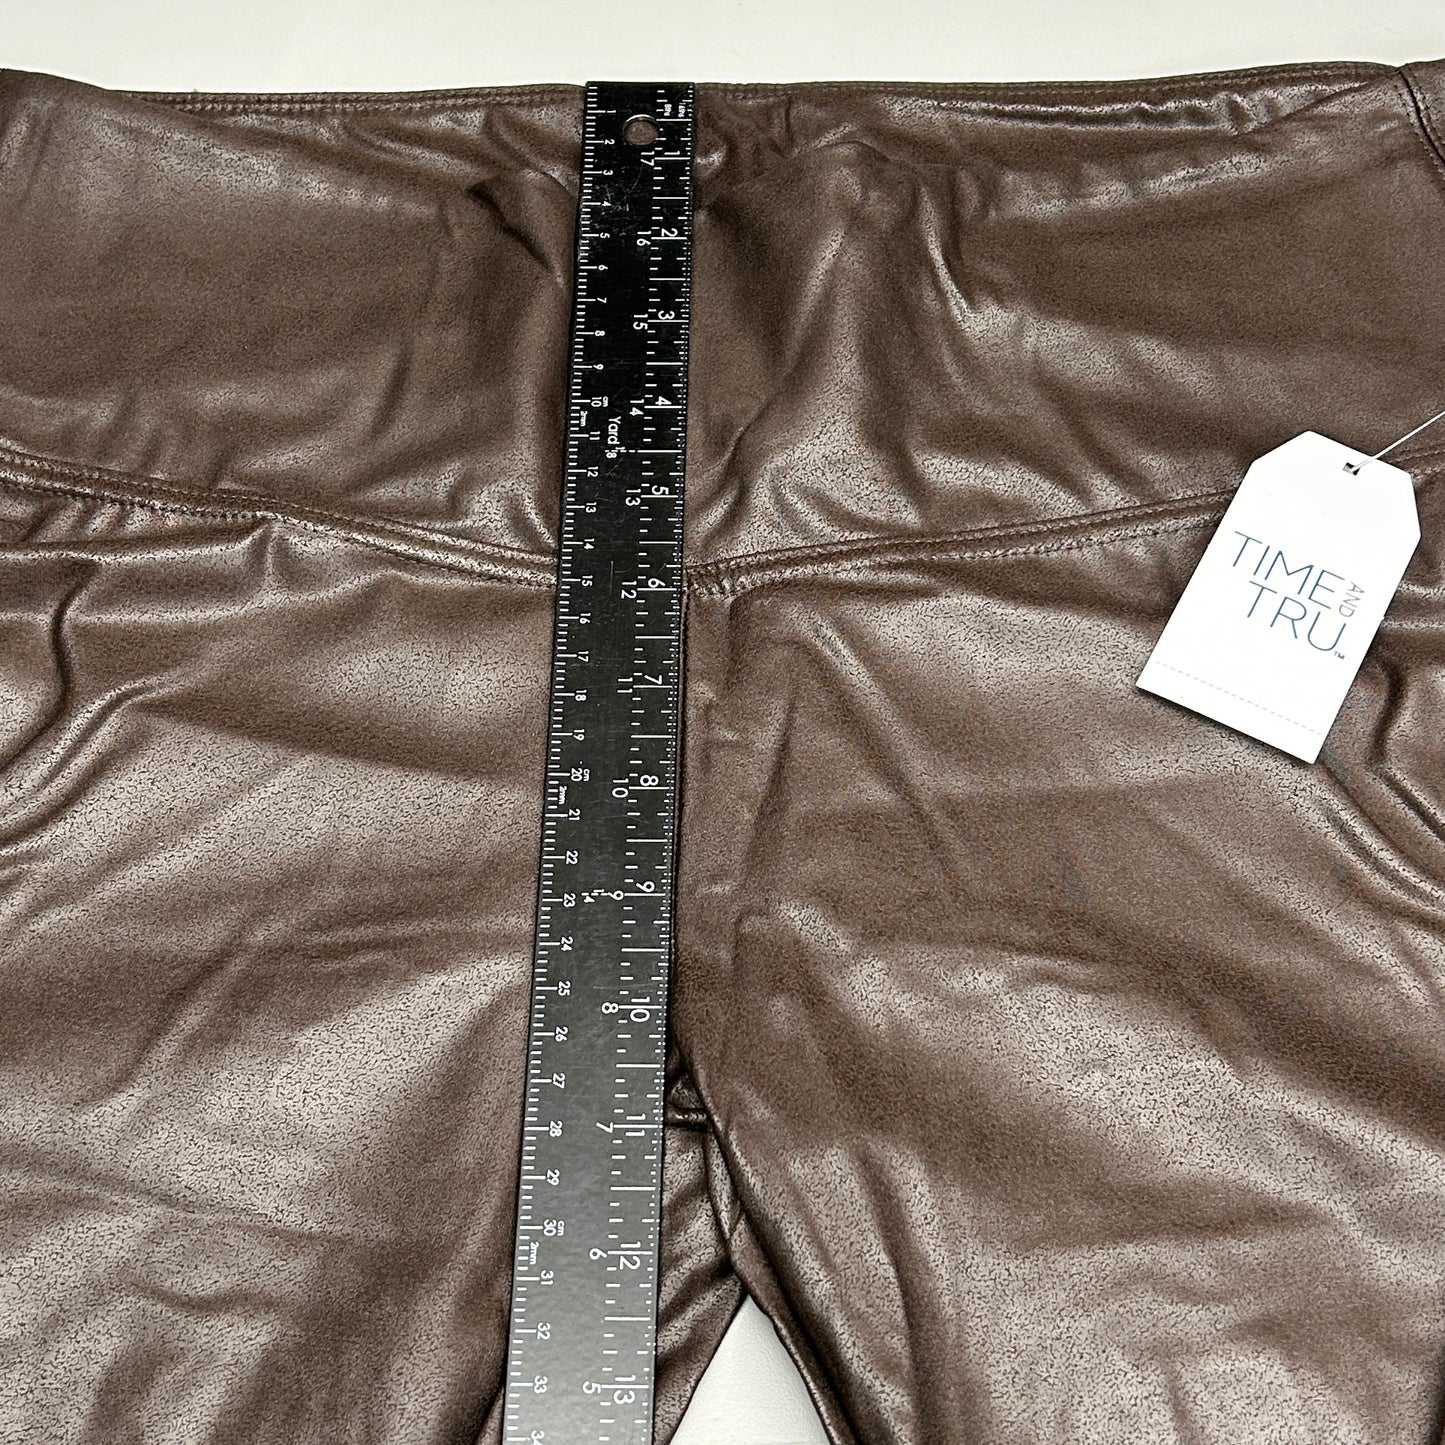 TIME AND TRU Women's Faux Leather Leggings Sz XL 16-18 Brown (New)